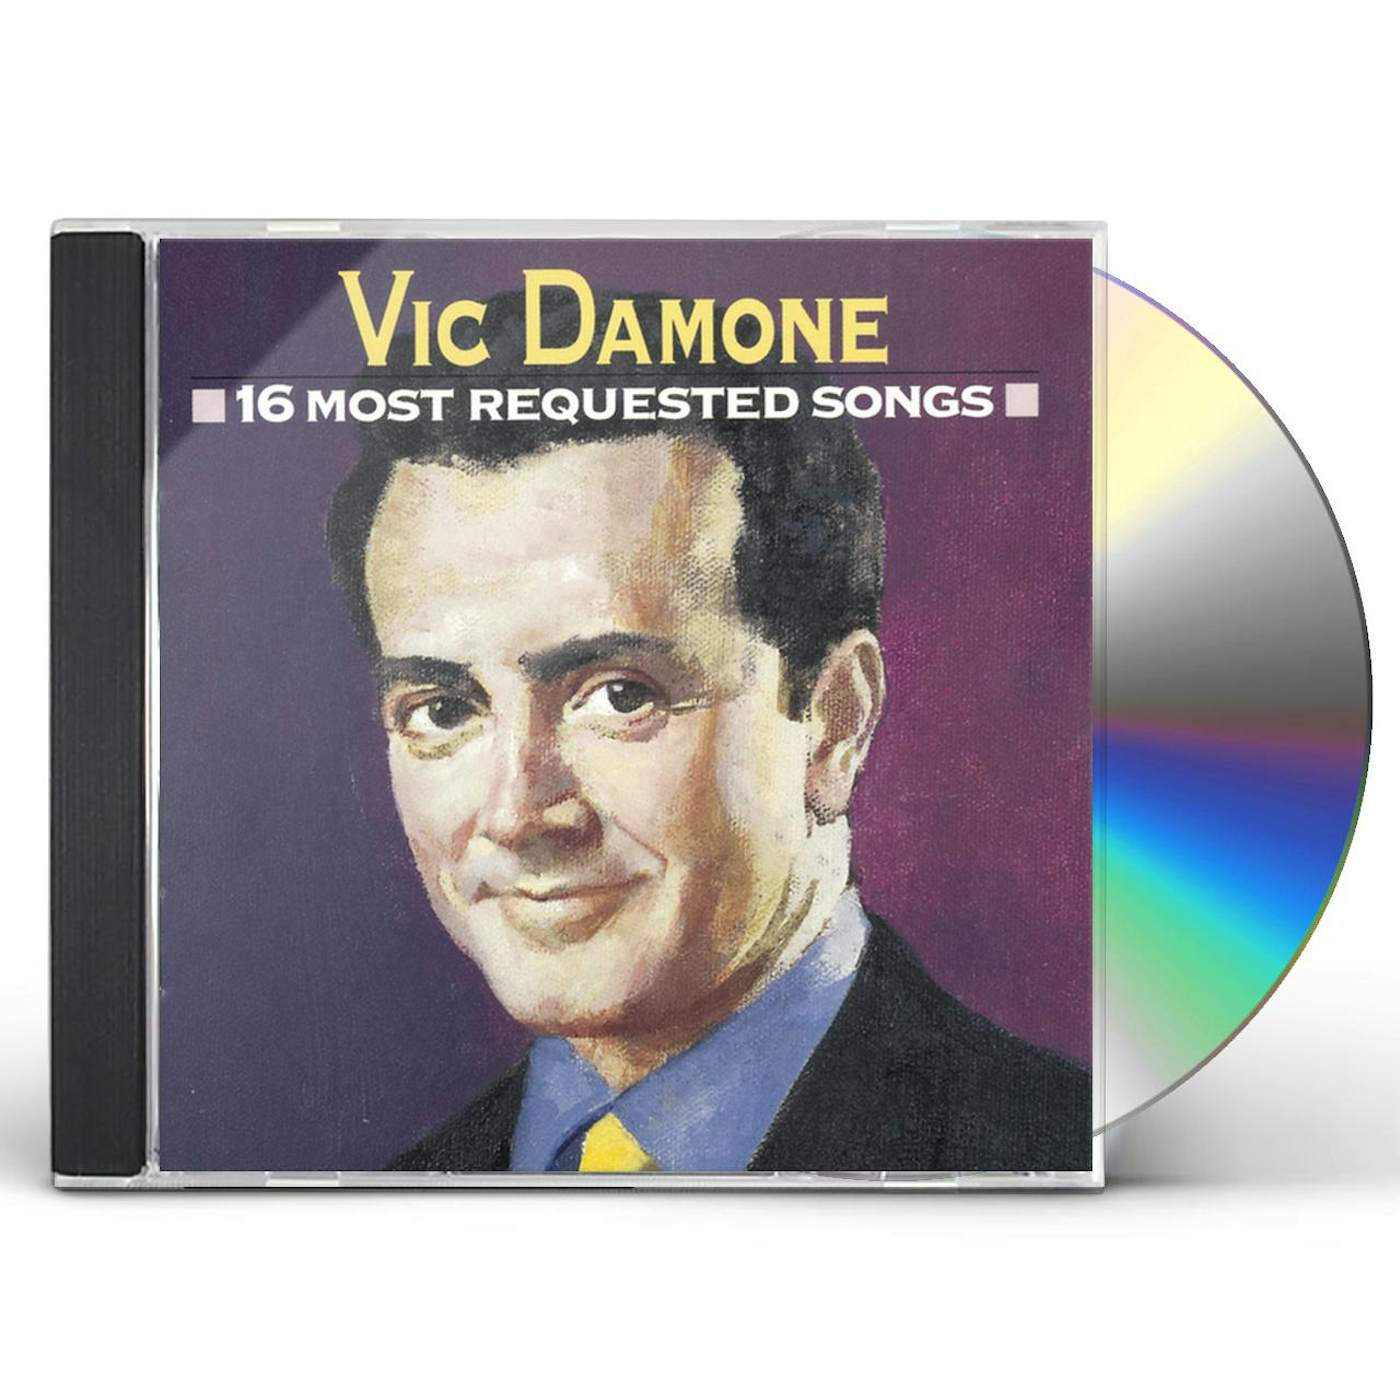 Vic Damone 16 MOST REQUESTED SONGS CD